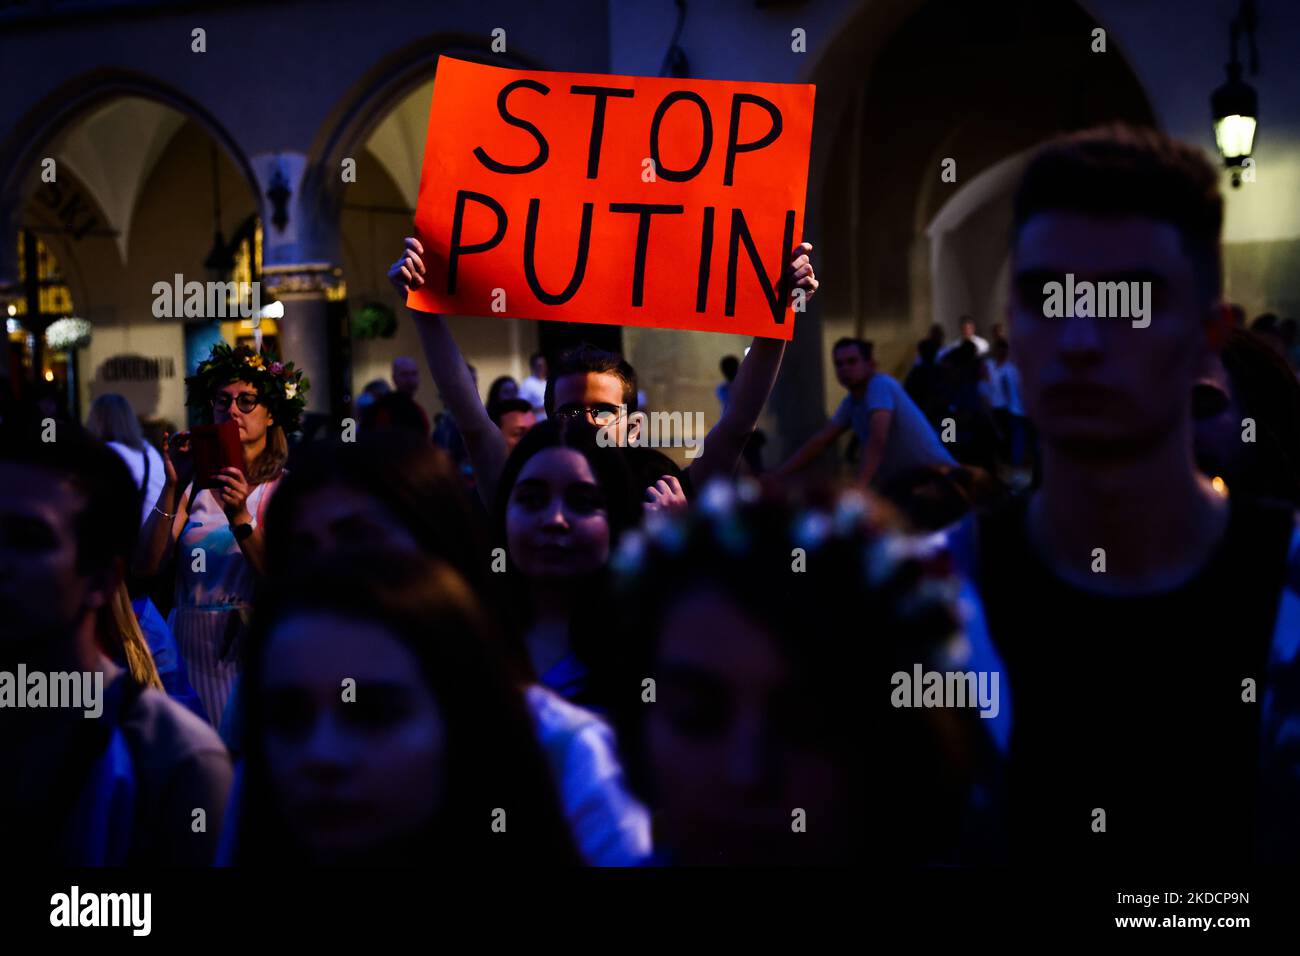 'Stop Putin' banner is seen suring a demonstration at the Main Square in support of Azovstal 4308 regiment defenders that are currently in Russian captivity. Krakow, Poland on June 25th, 2022. Peaceful rallies were held around the world in support of more than 2,500 Azovstal prisoners of war. The Azov Regiment was among the Ukrainian units that defended the steelworks in the city of Mariupol for nearly three months before surrendering in May under relentless Russian attacks from the ground, sea and air. (Photo by Beata Zawrzel/NurPhoto) Stock Photo